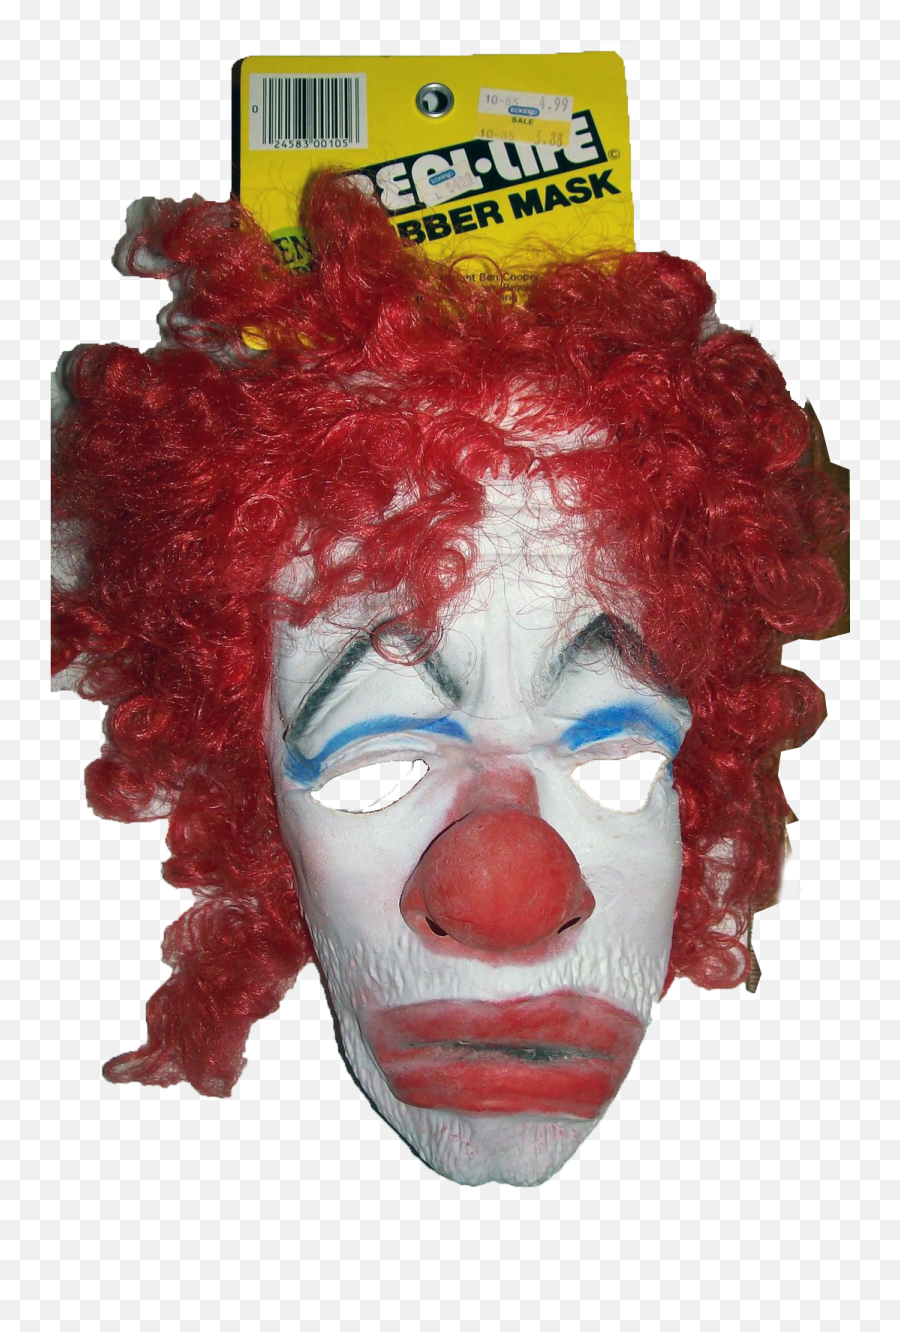 Frobow The Sad Clown  Roblox Clown Hair PNG Image  Transparent PNG Free  Download on SeekPNG